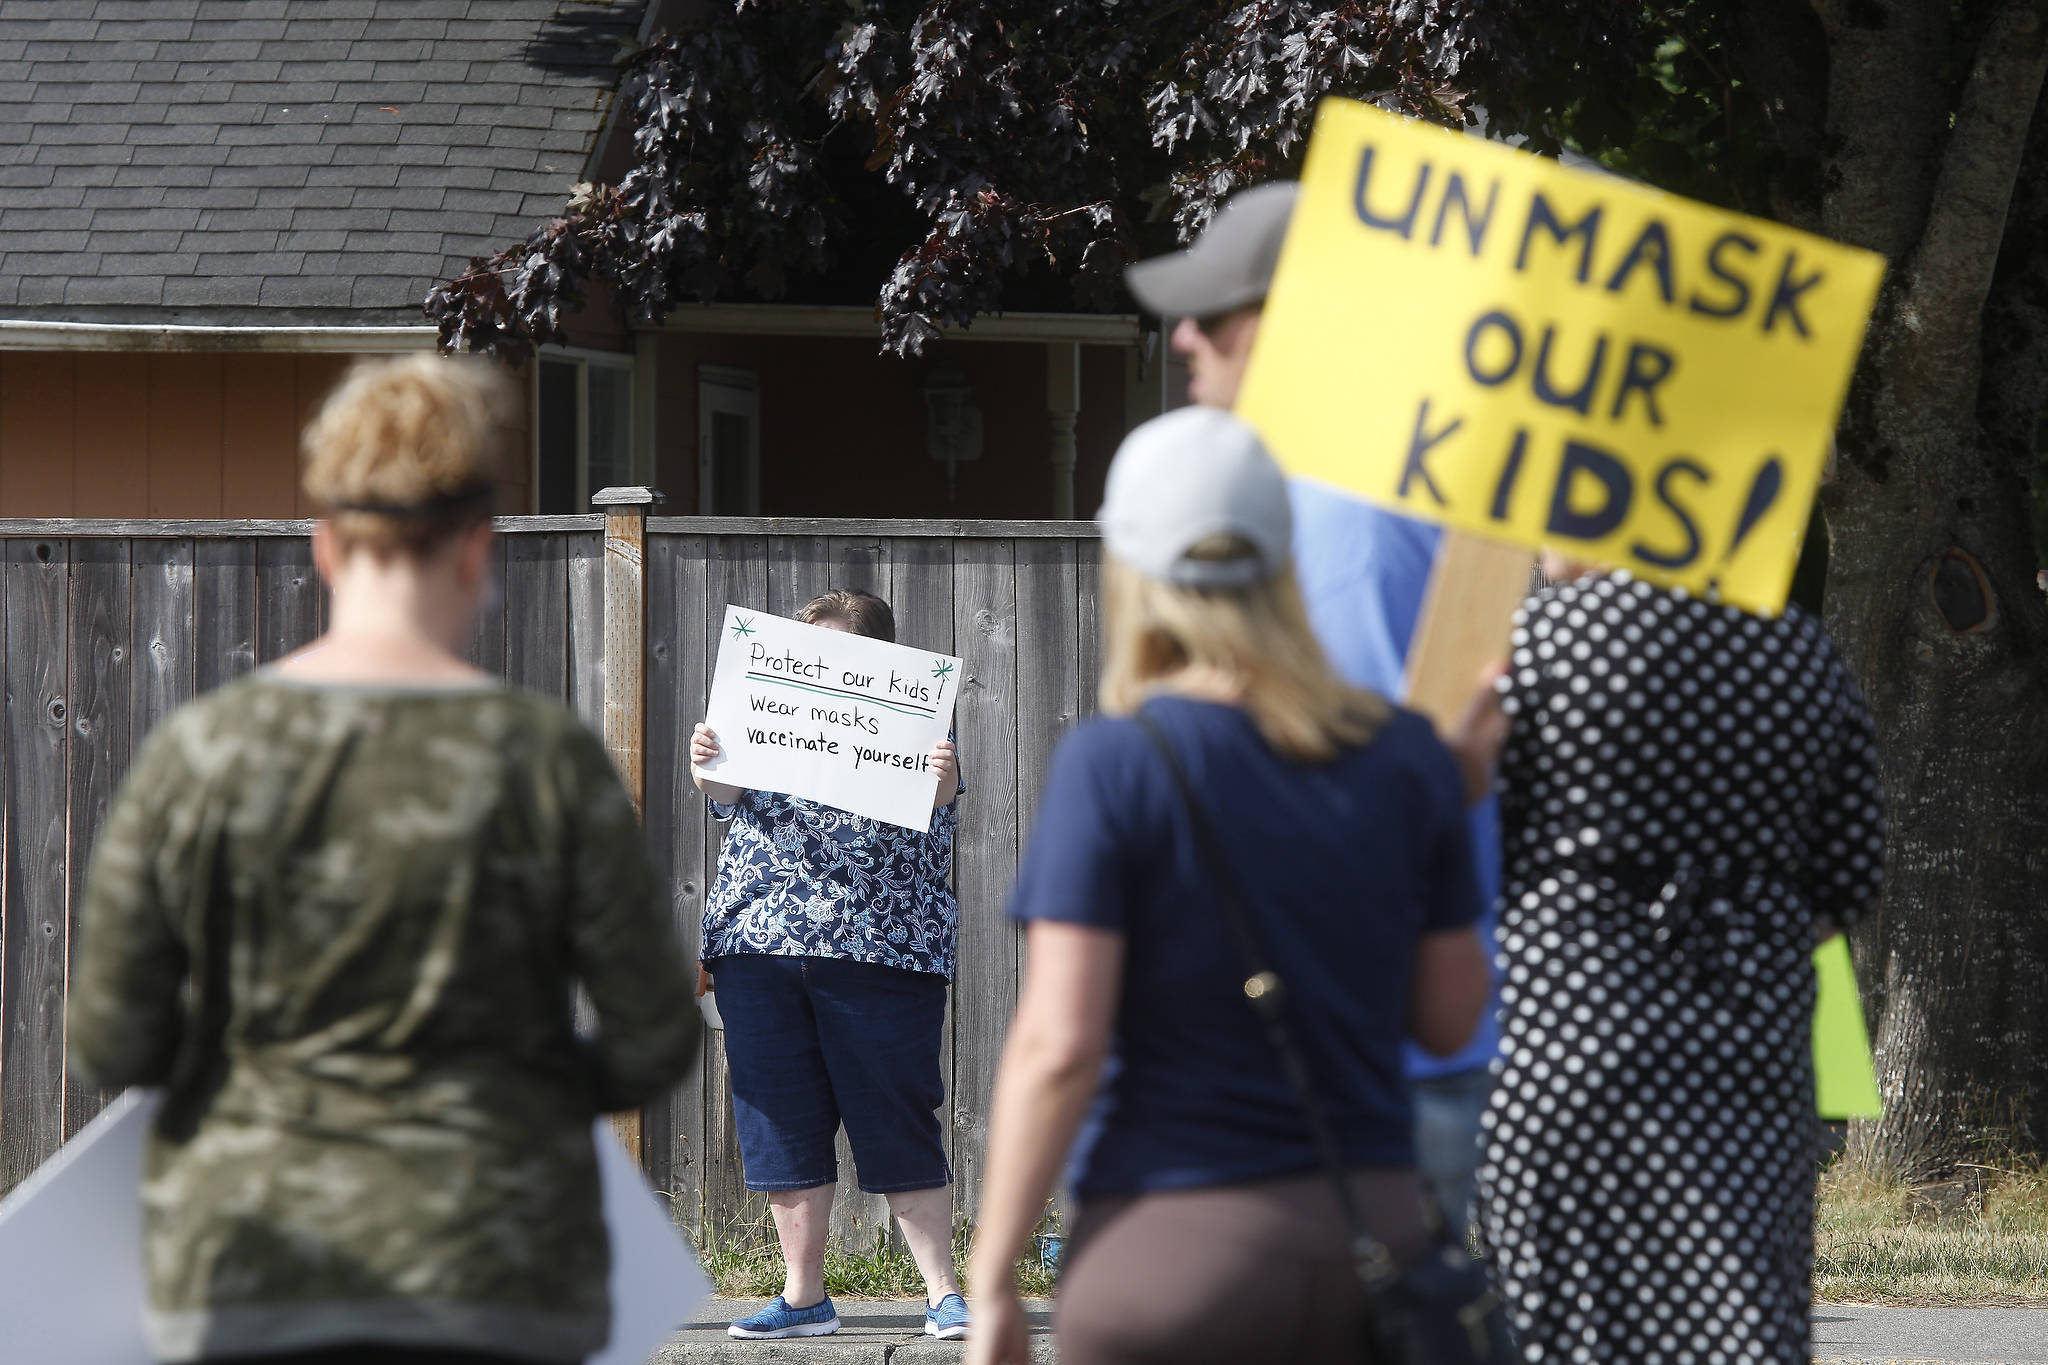 A counter-protester holds up her sign on Wednesday as about 75 adults and kids gather in front of the Marysville School District office to voice their anger over mask mandates in schools. (Andy Bronson / The Herald)